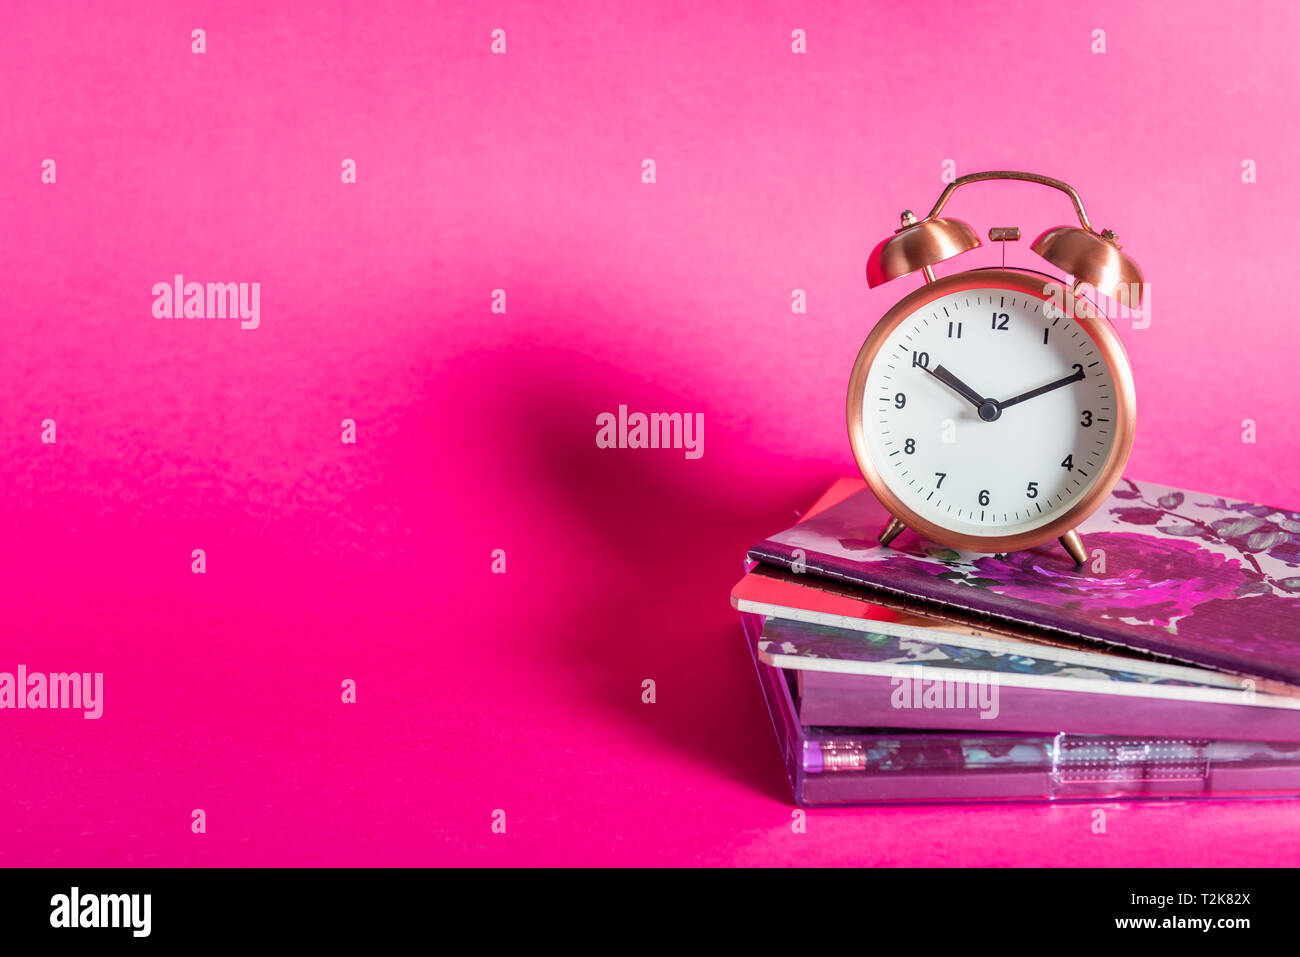 Different Notebooks And Alarm Clock On Bright Pink Background